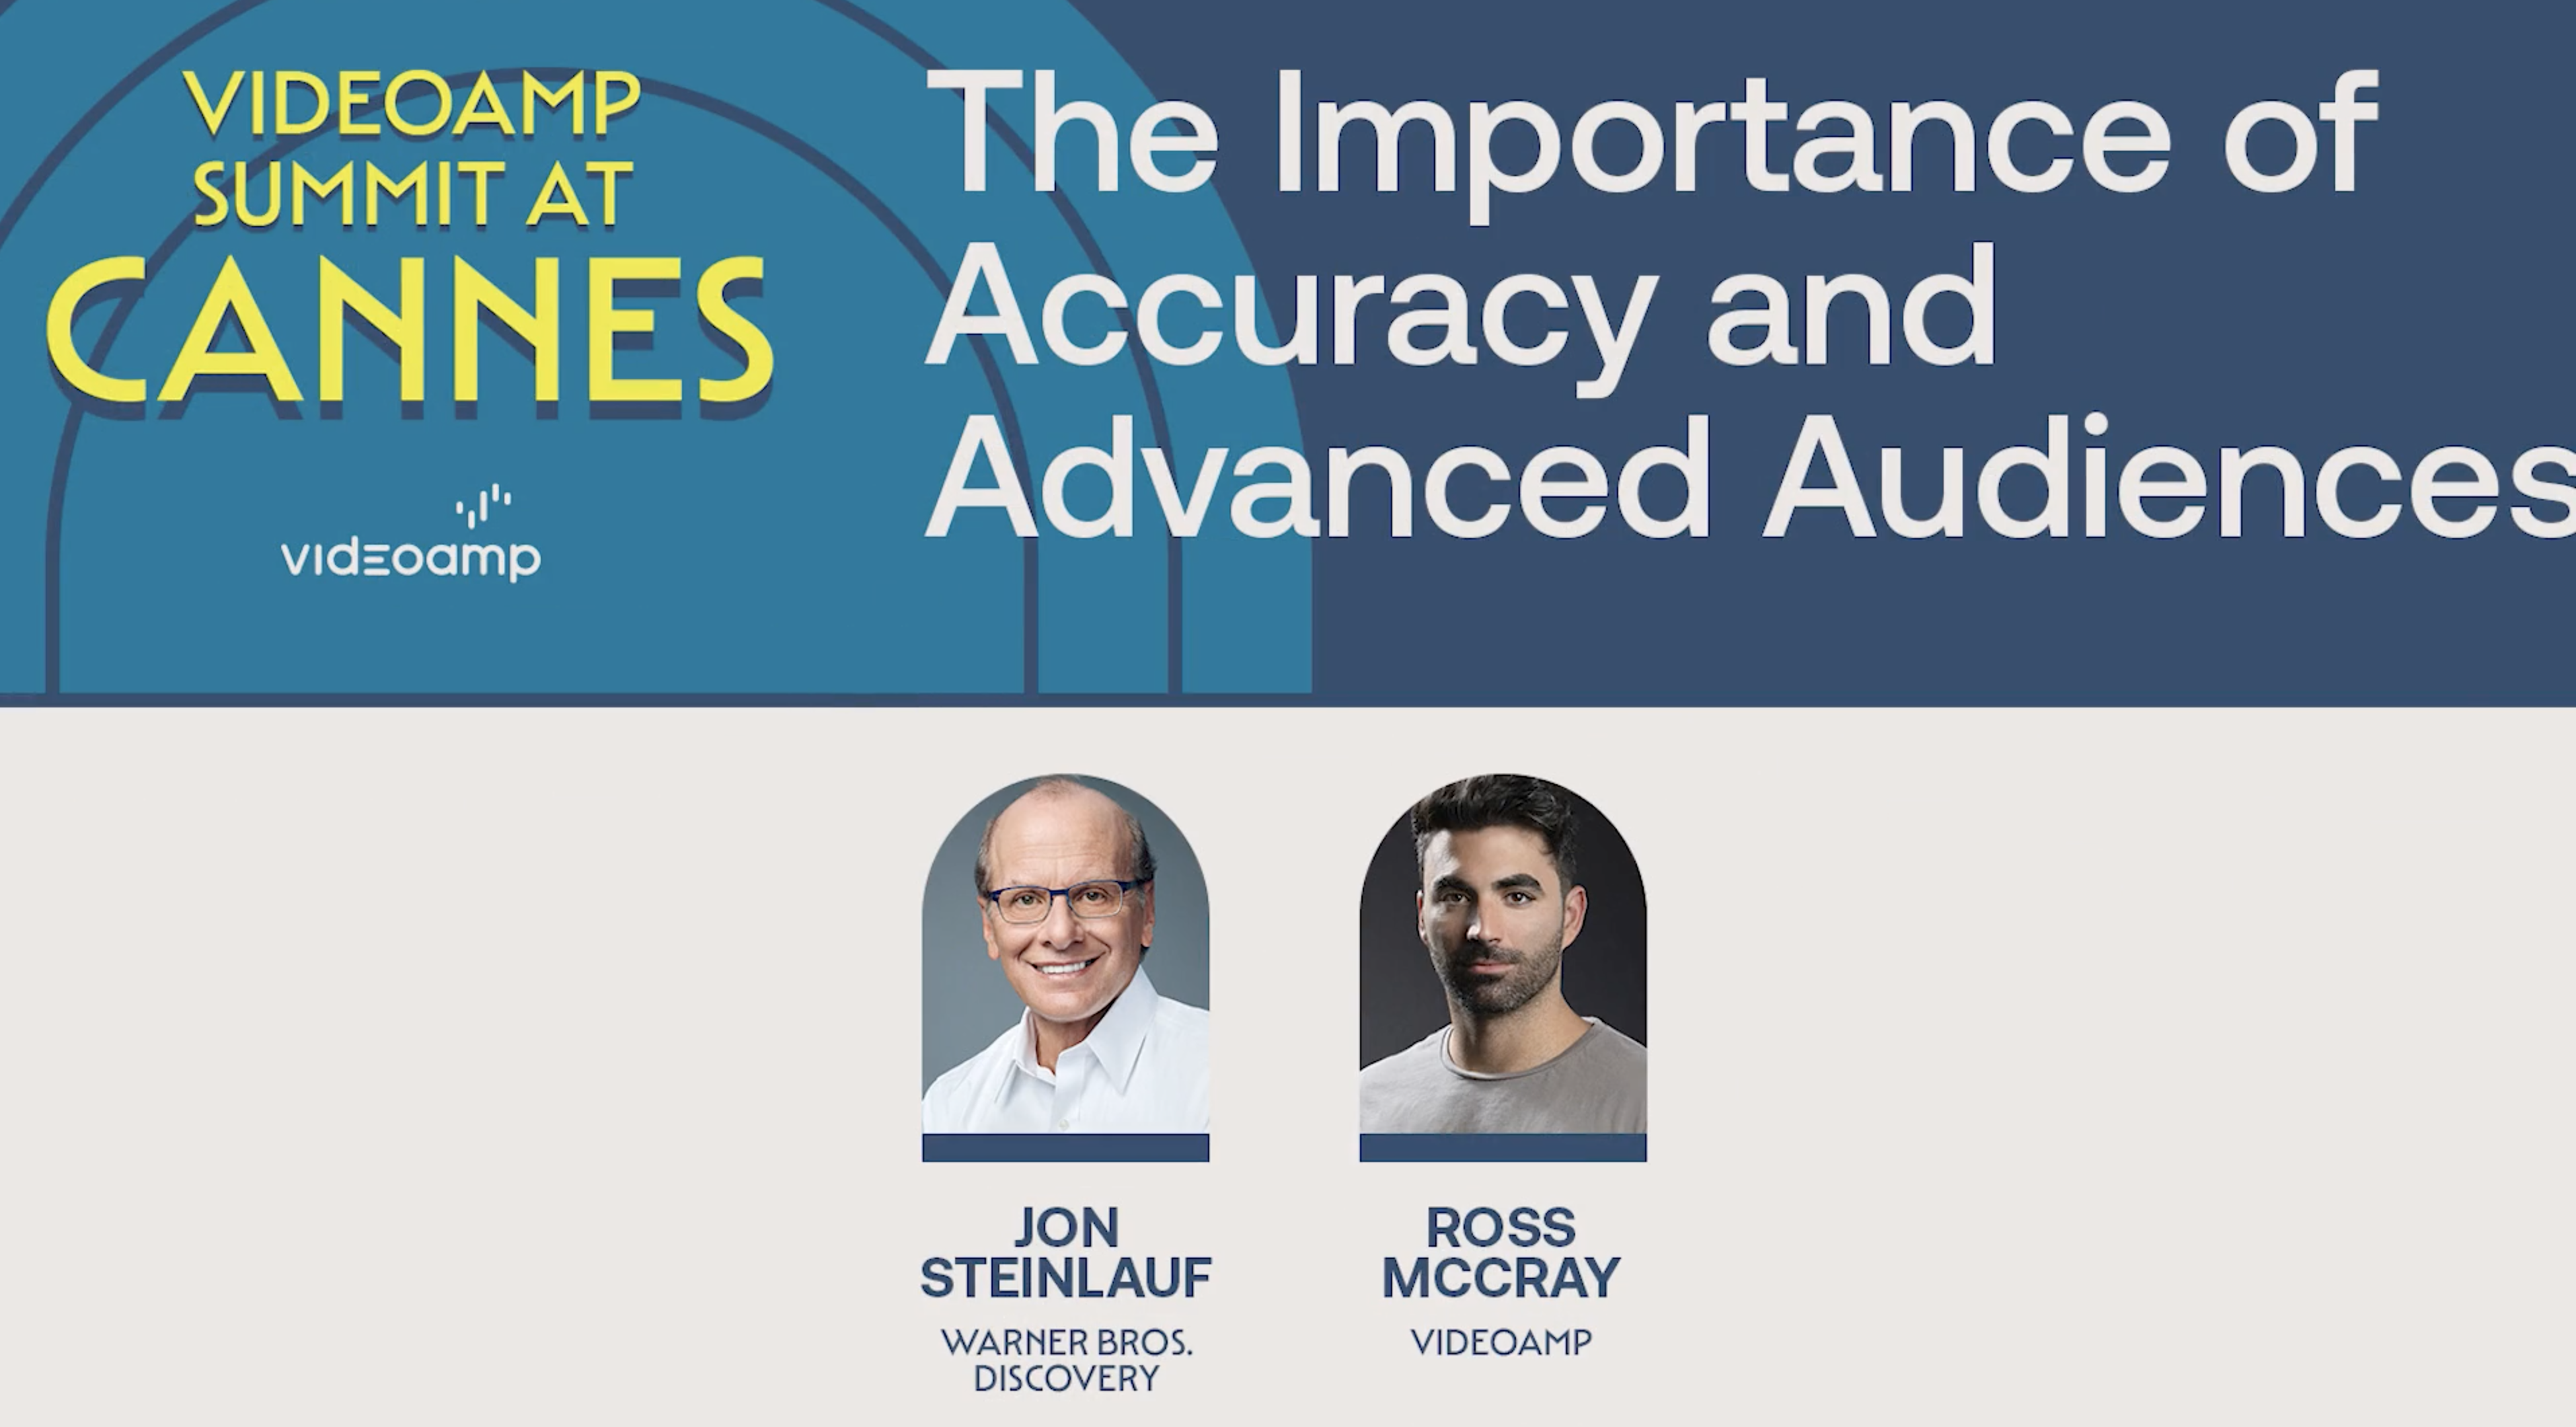 The Importance of Accuracy and Advanced Audiences